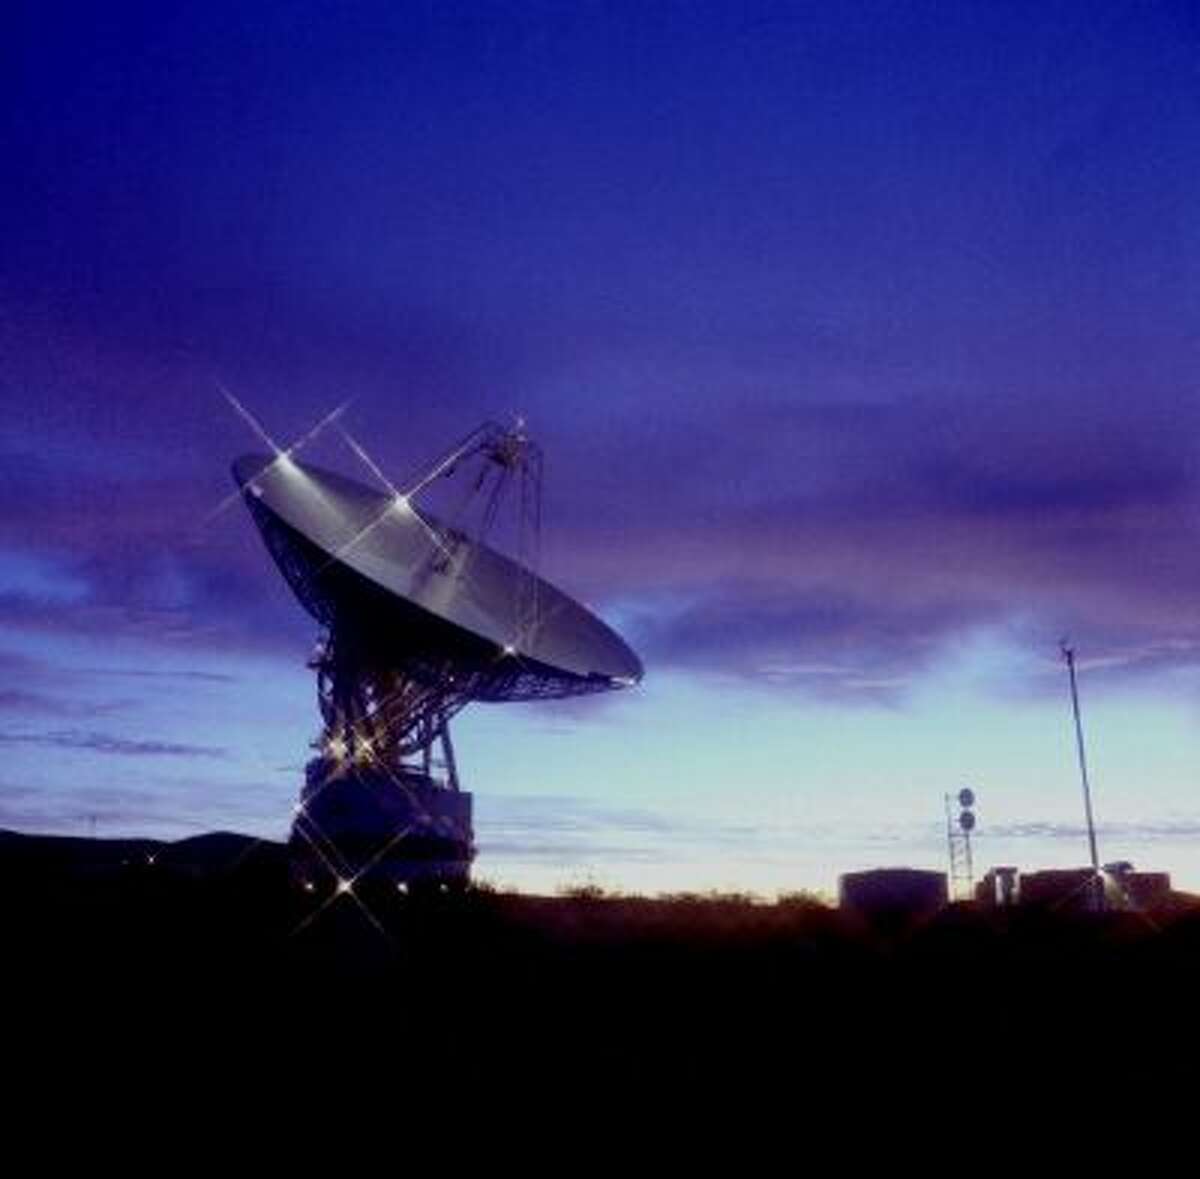 The NASA Deep Space Network is a network of antennas that supports interplanetary spacecraft missions and radar astronomy observations to explore the deeper universe. It turns 50 Christmas Eve.